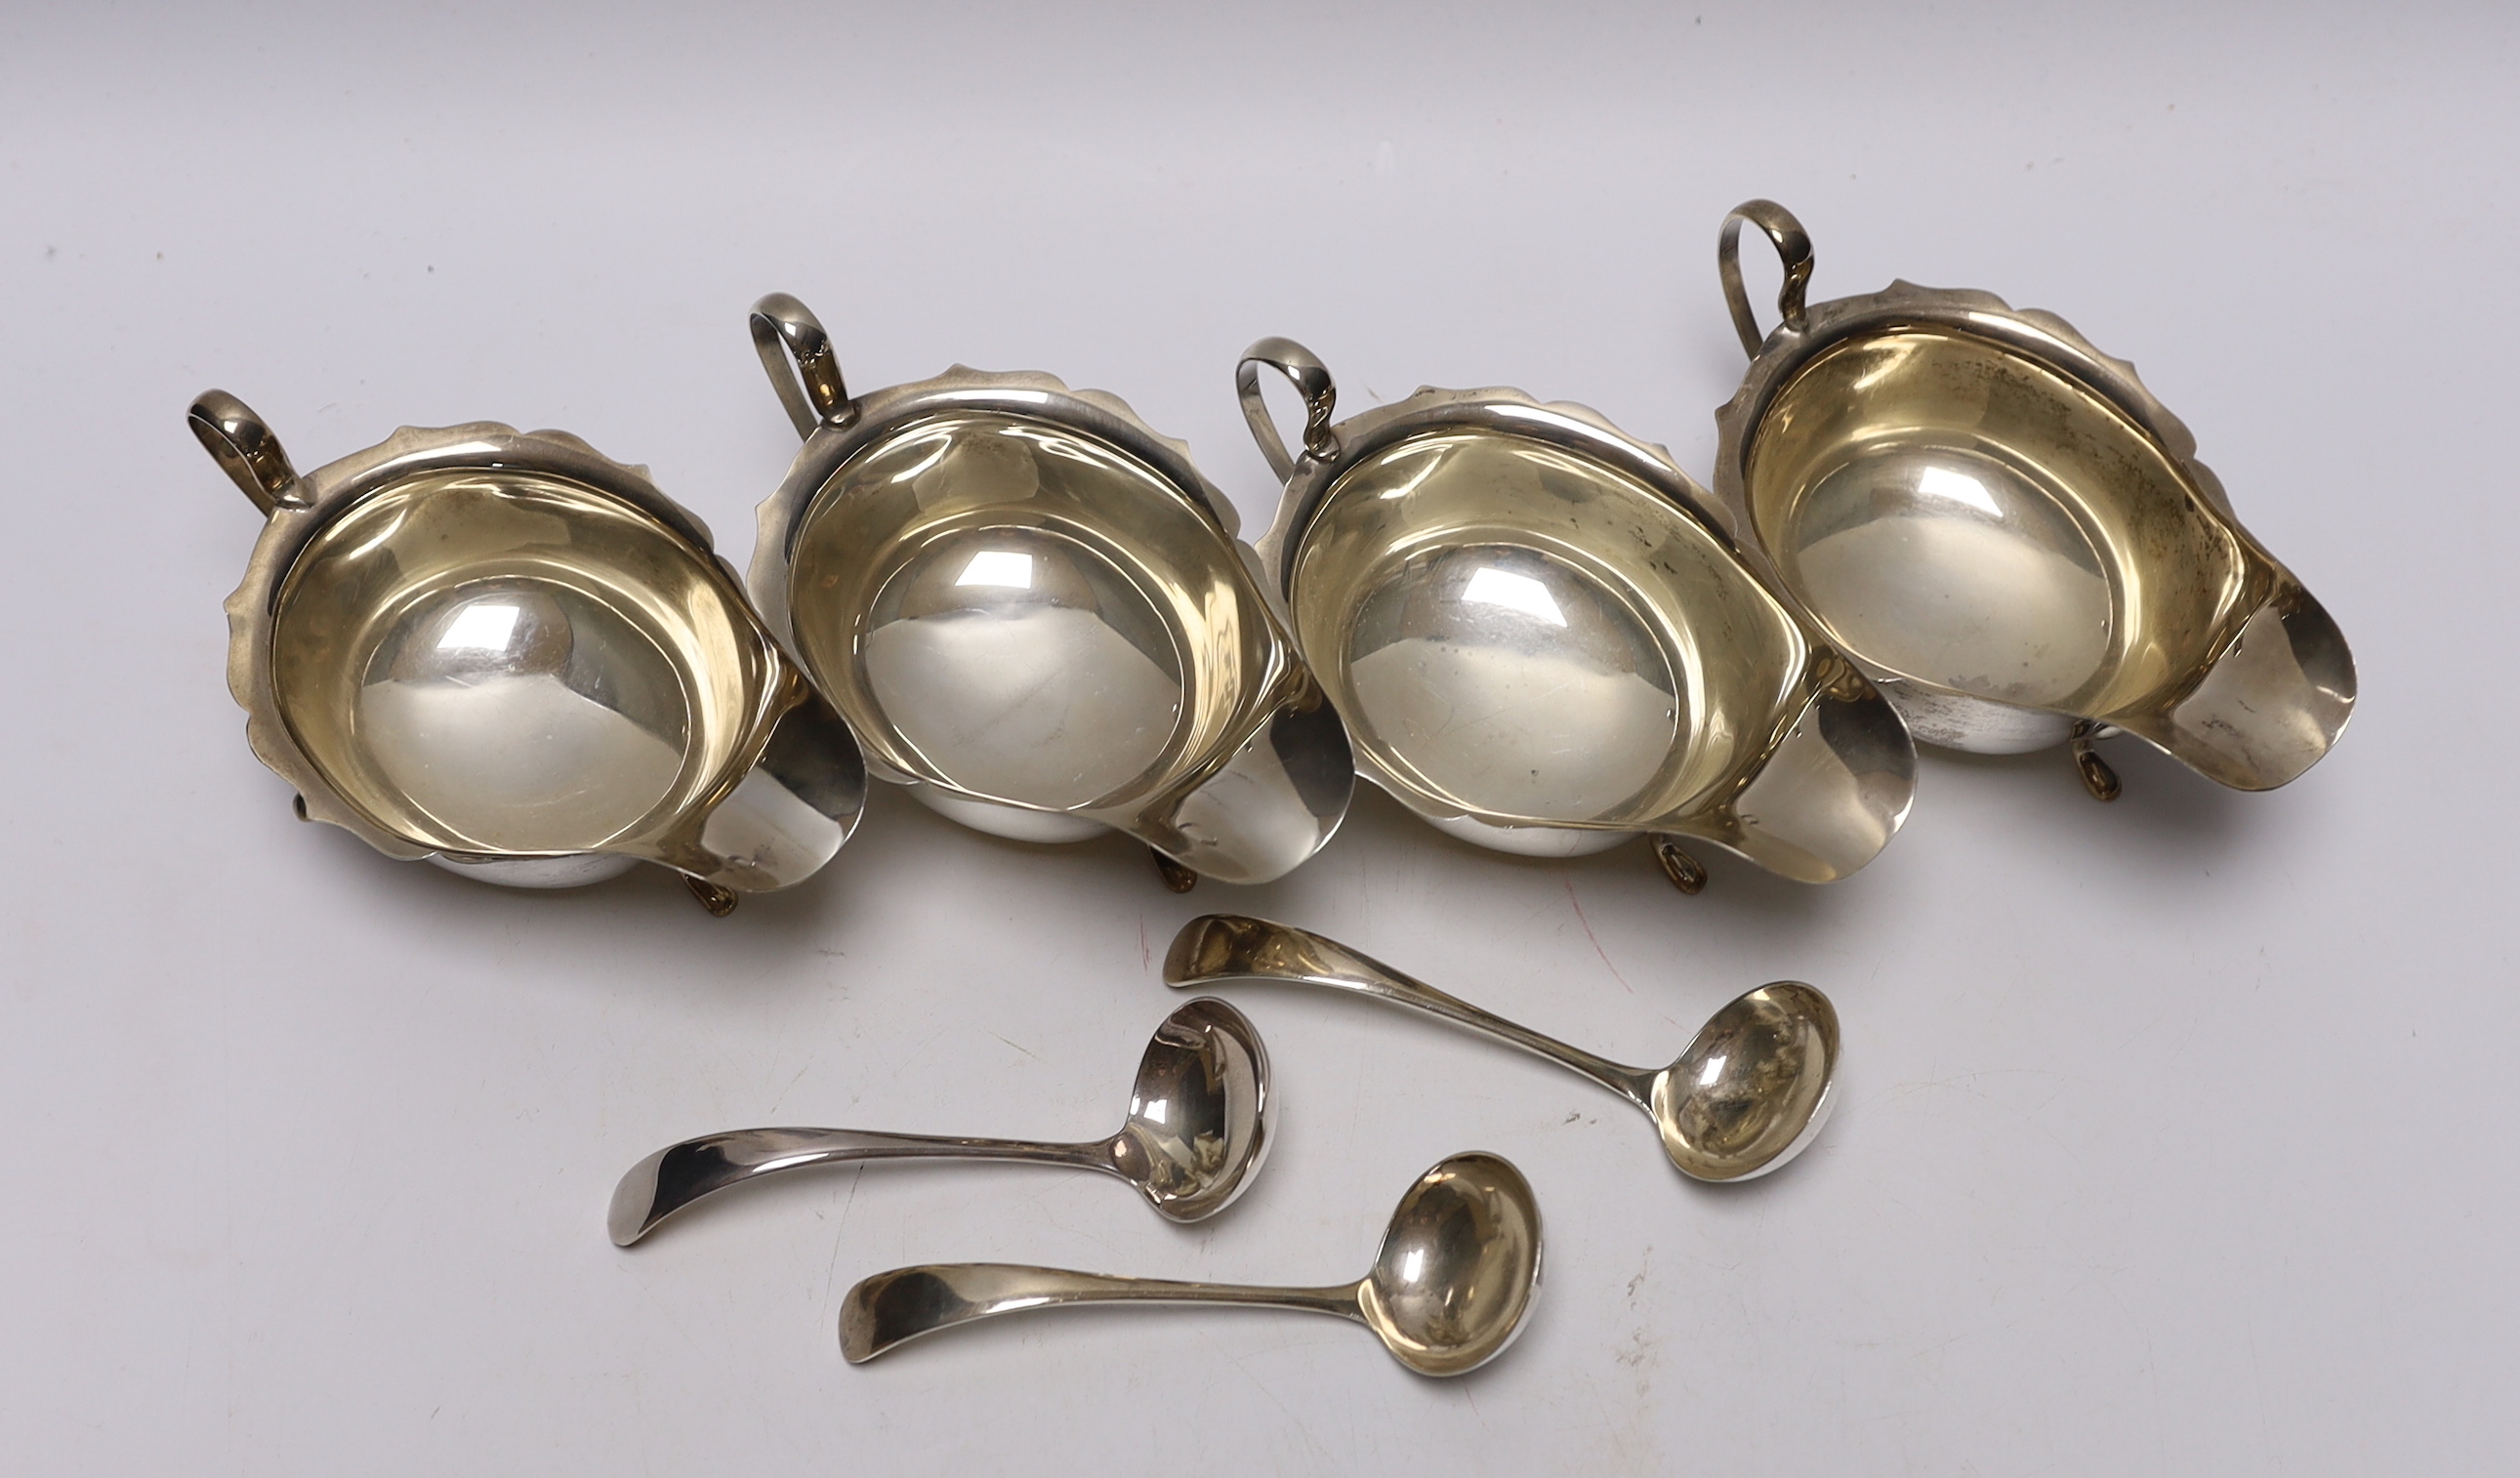 A set of three George VI silver sauceboats, Viners Ltd, Sheffield, 1937, together with three ladles (two silver) and one other silver sauceboat, 16.1oz.